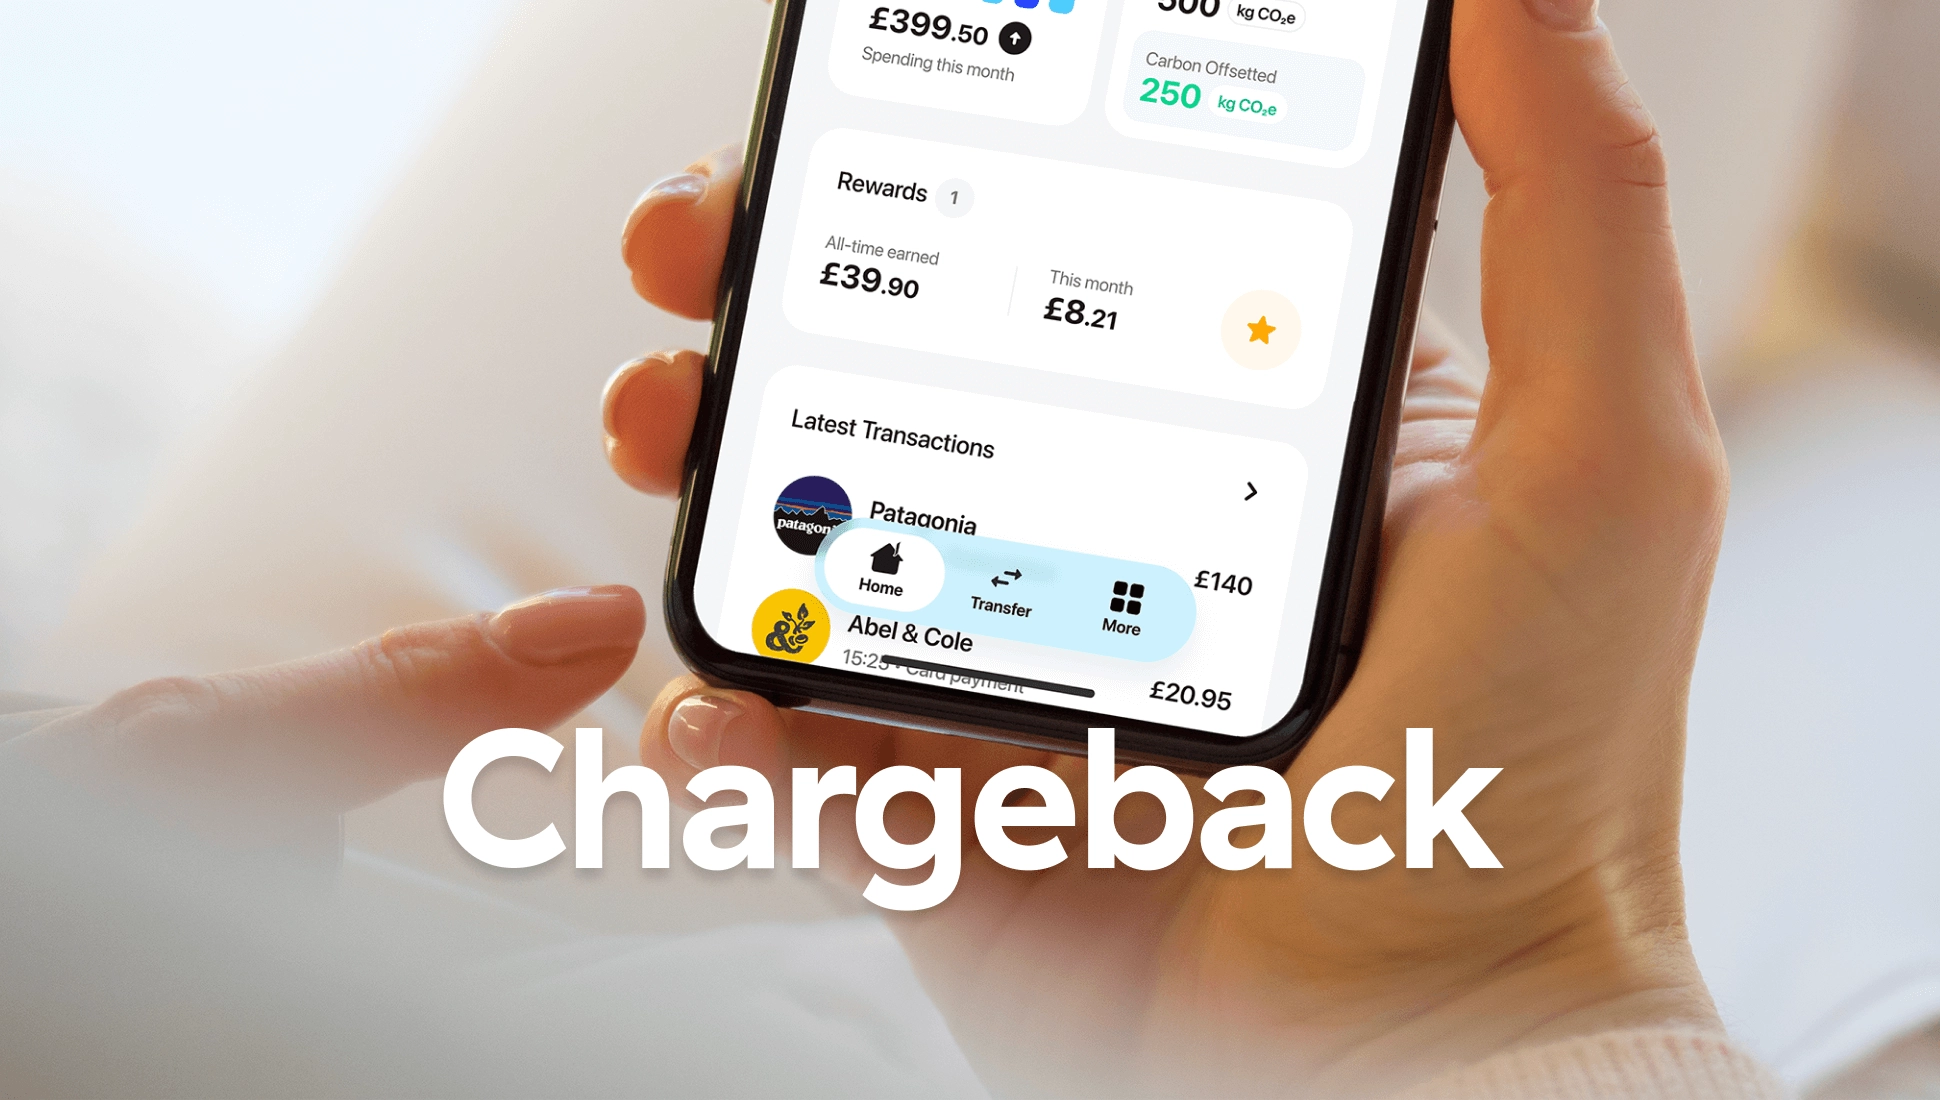 What are chargebacks and when can you claim?